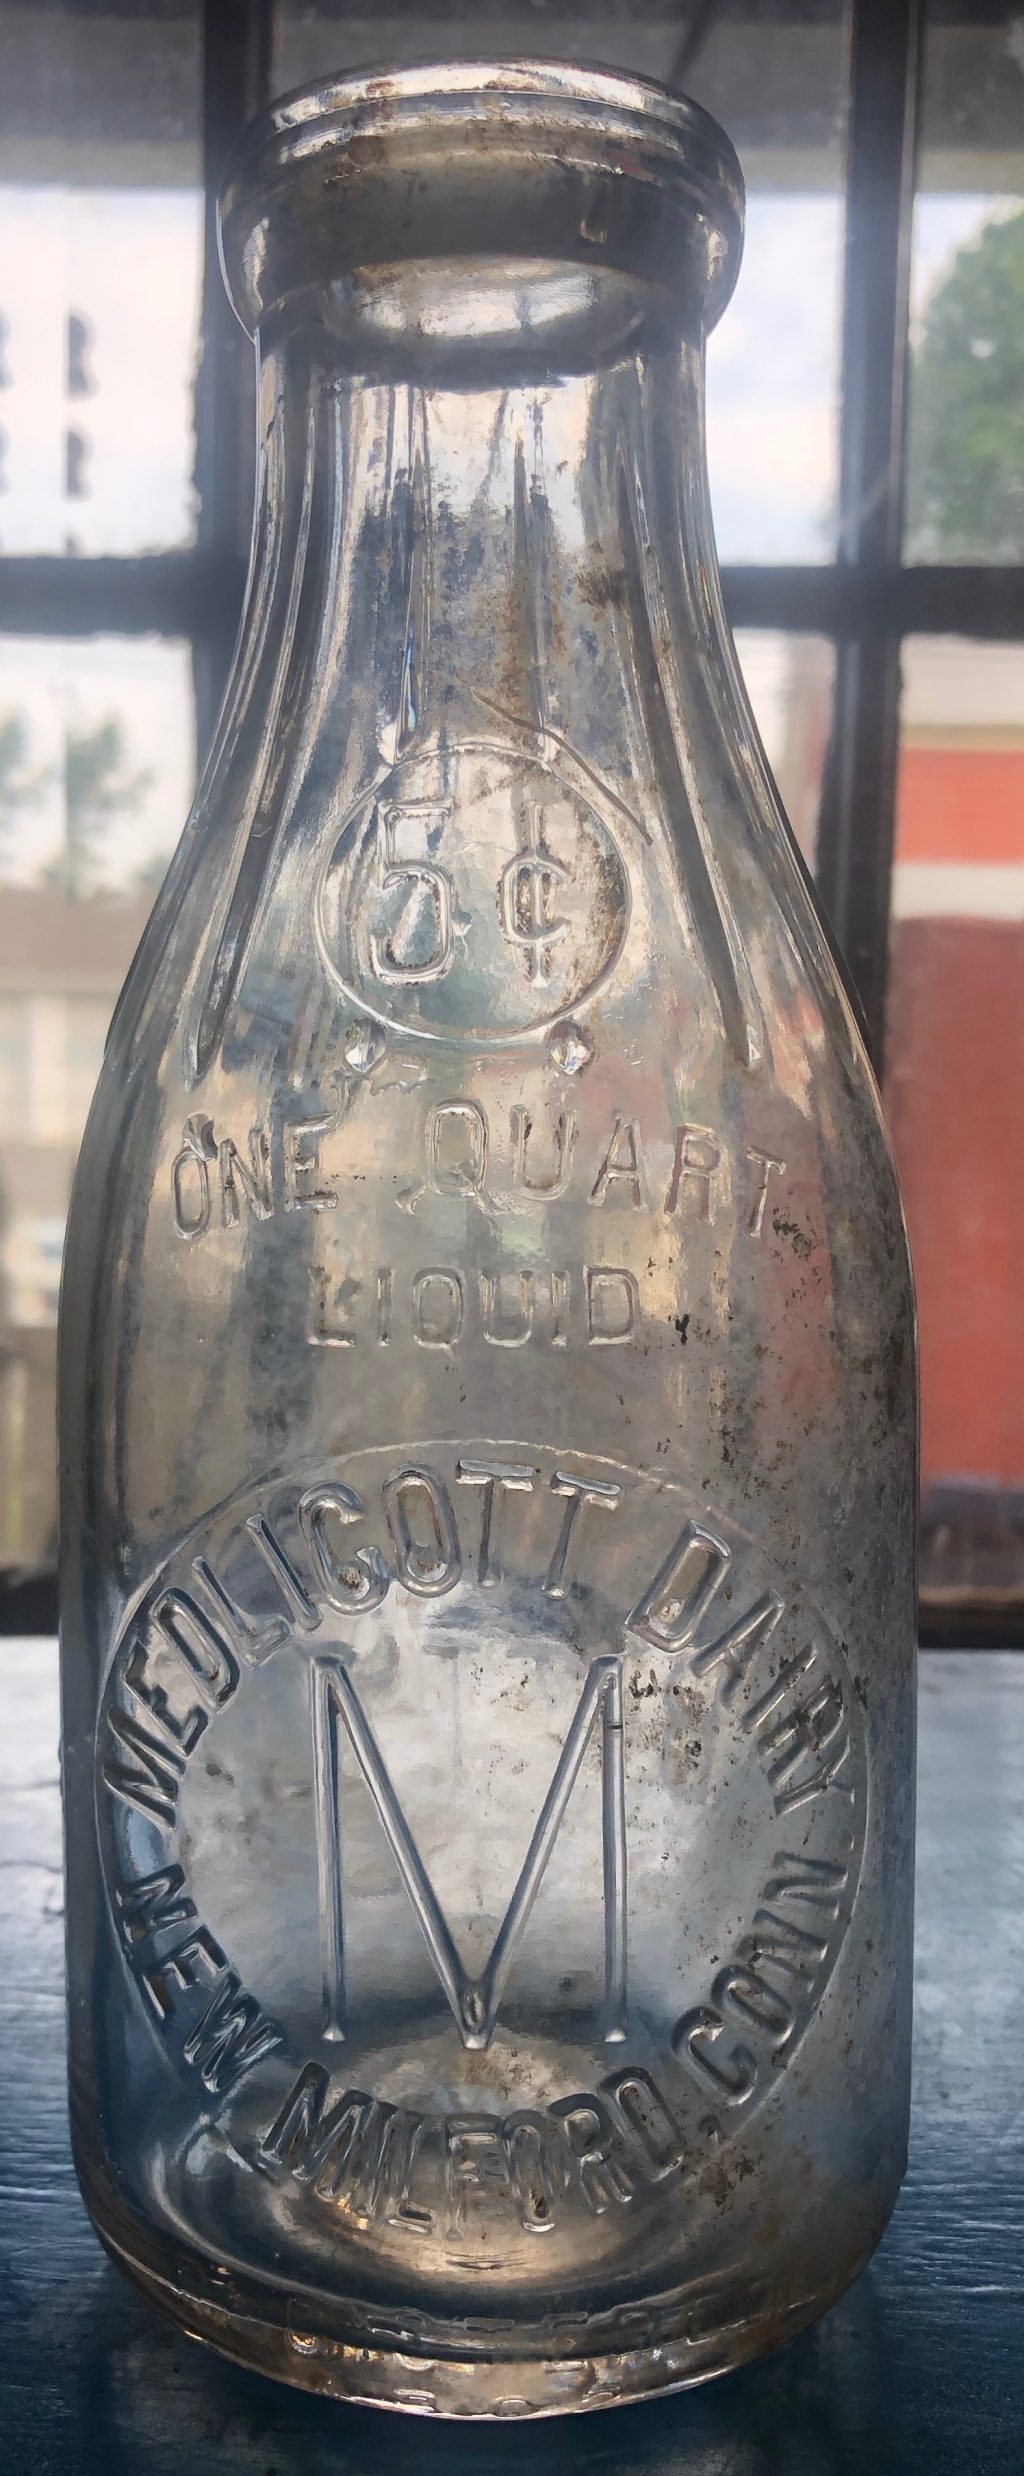 Old New Milford Ct Bottles | HAT CITY DIGGERS